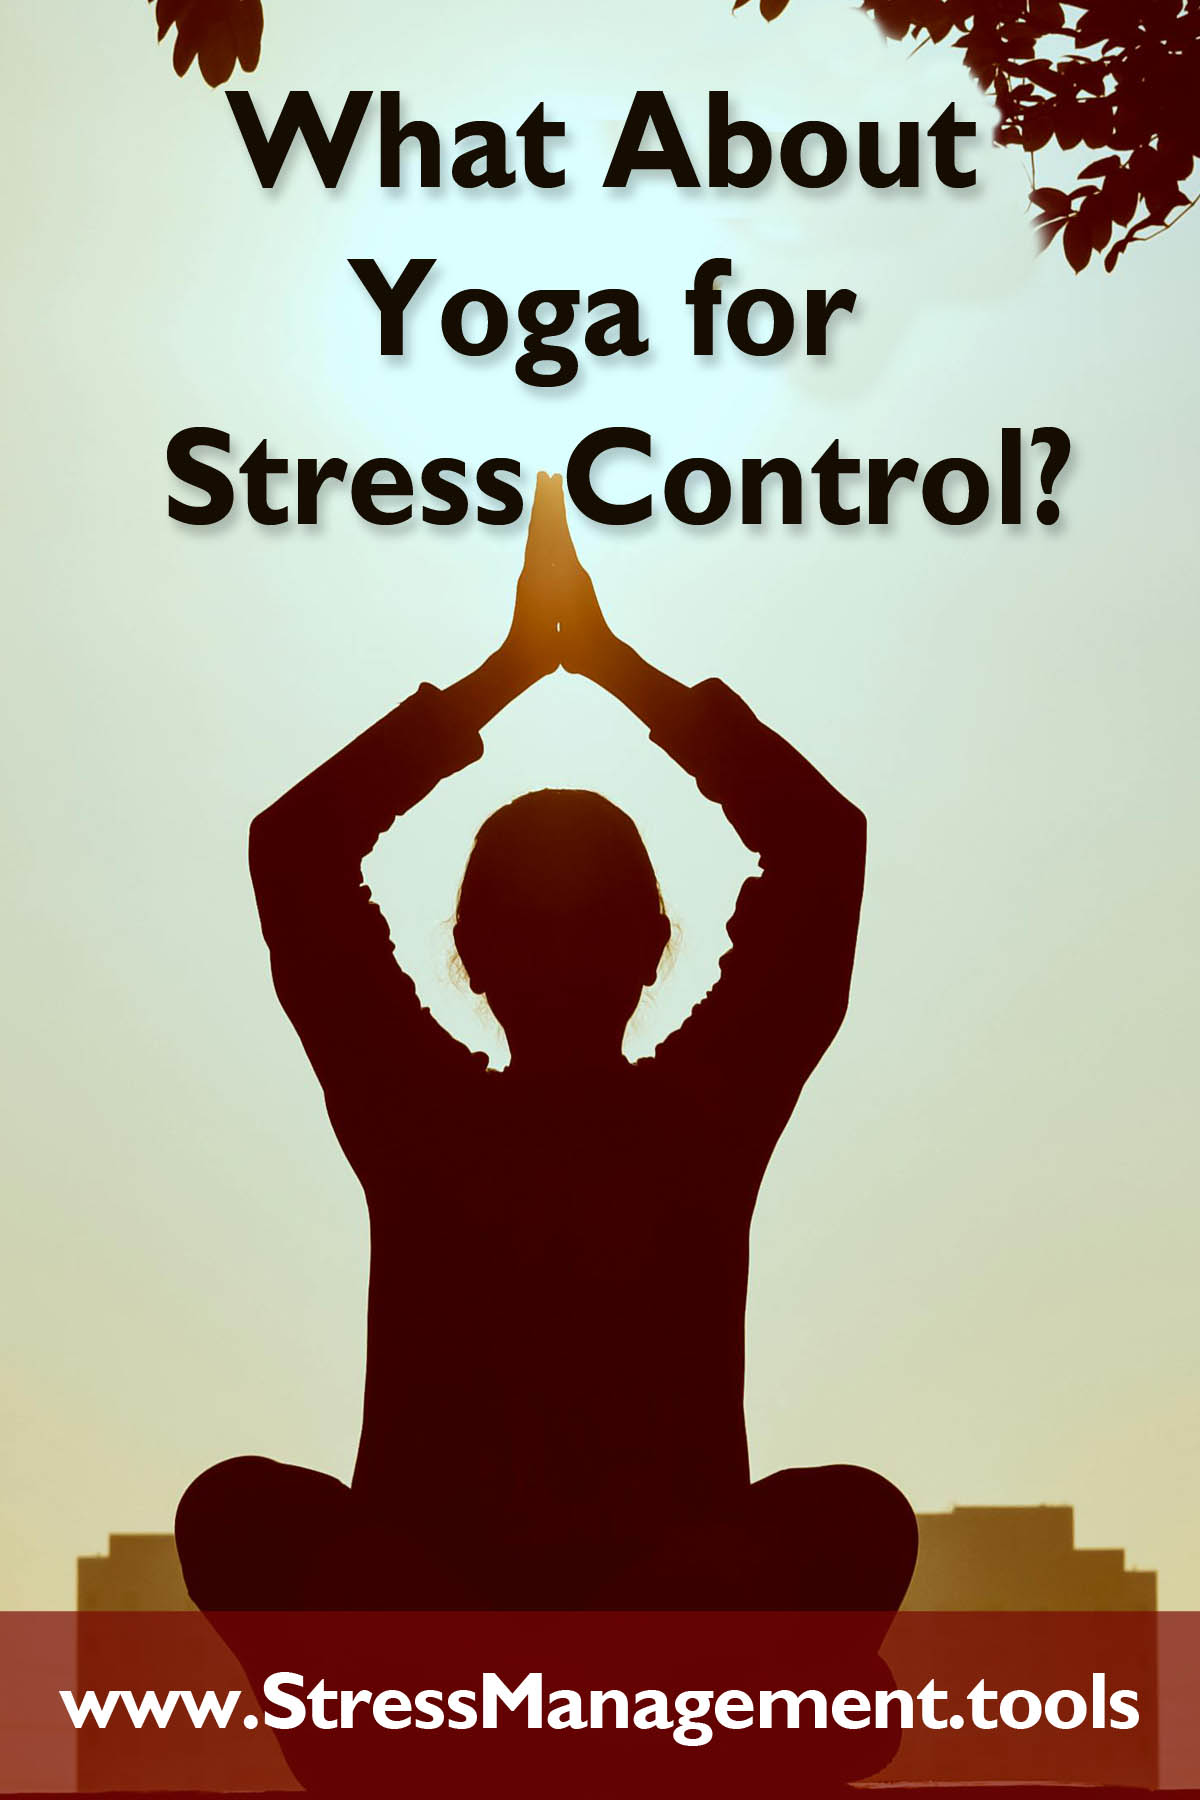 What About Yoga for Stress Control?